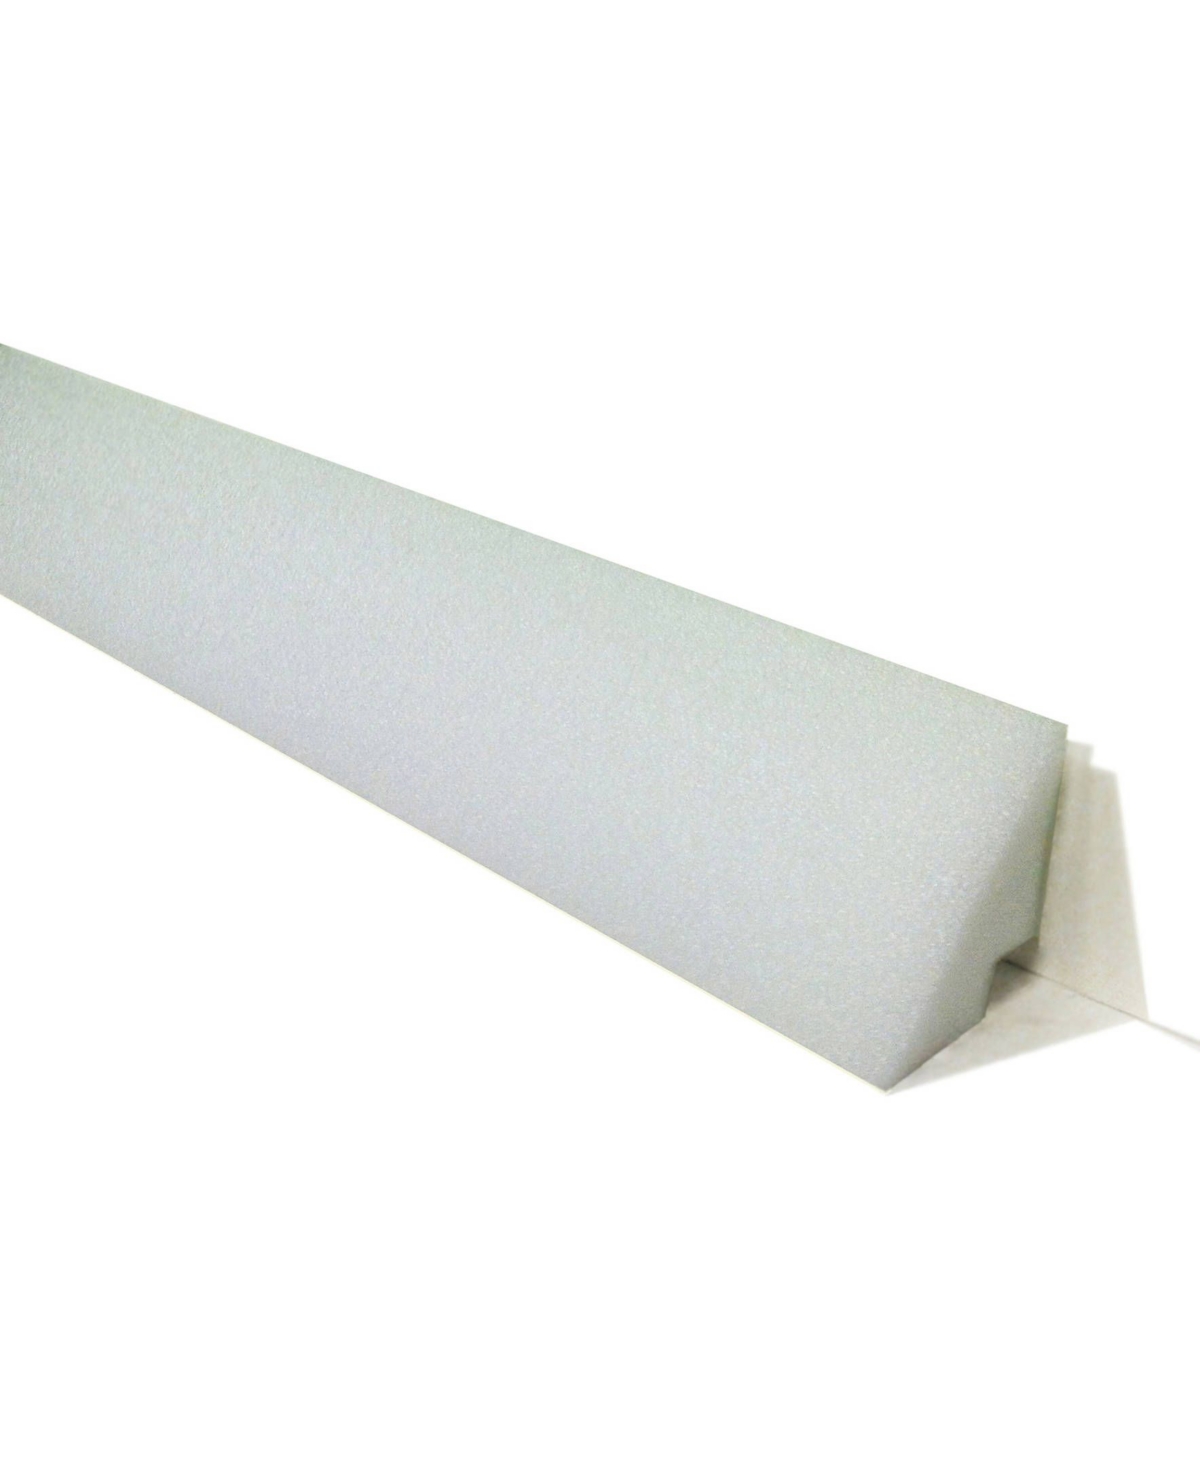 Sports 48" Peel and Stick Above Ground Pool Cover - 21 Pack - White